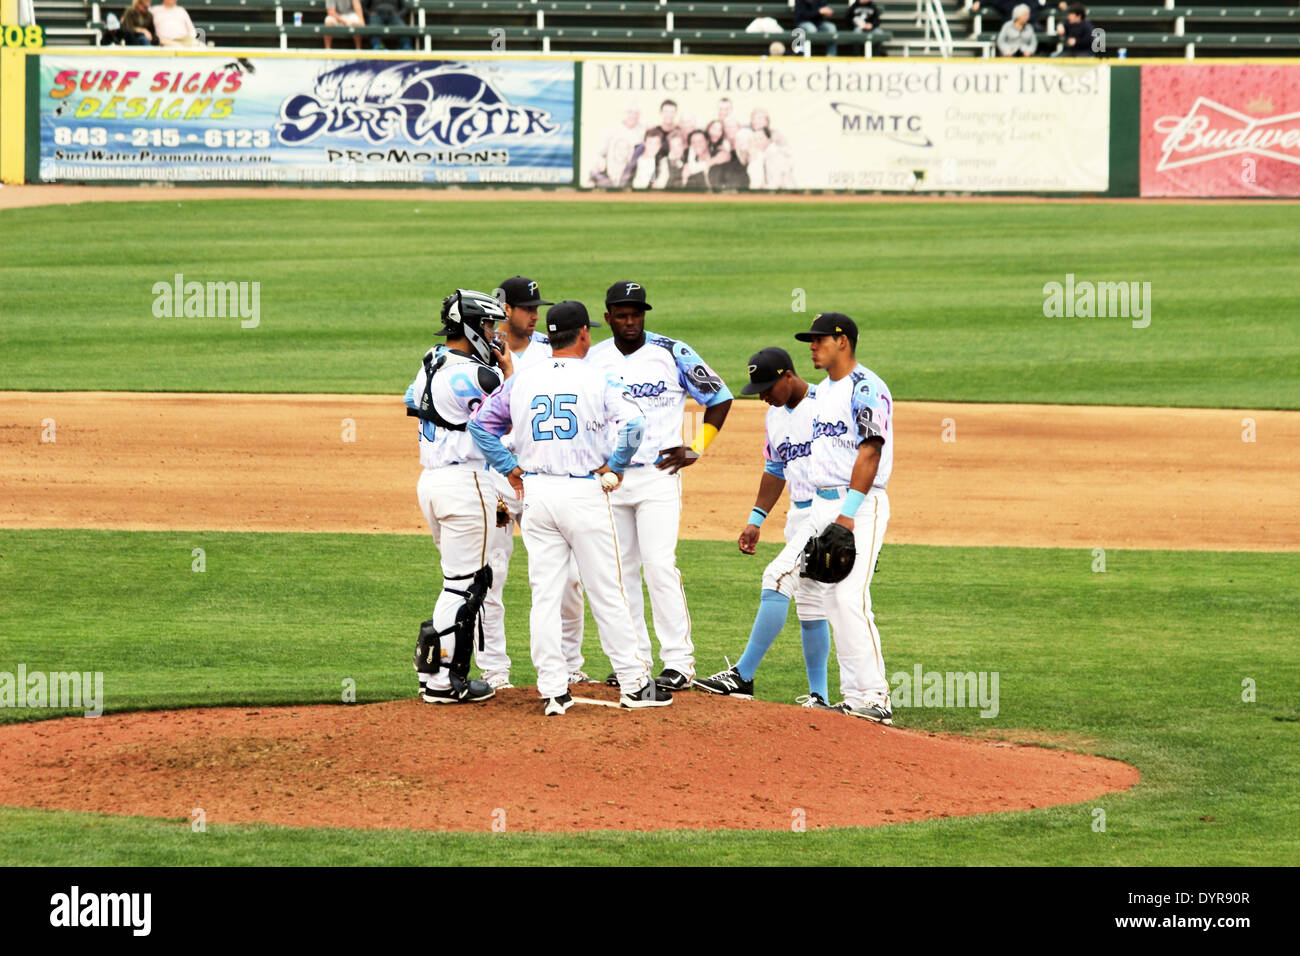 A baseball team converges on the pitchers mound to discuss strategy. Stock Photo